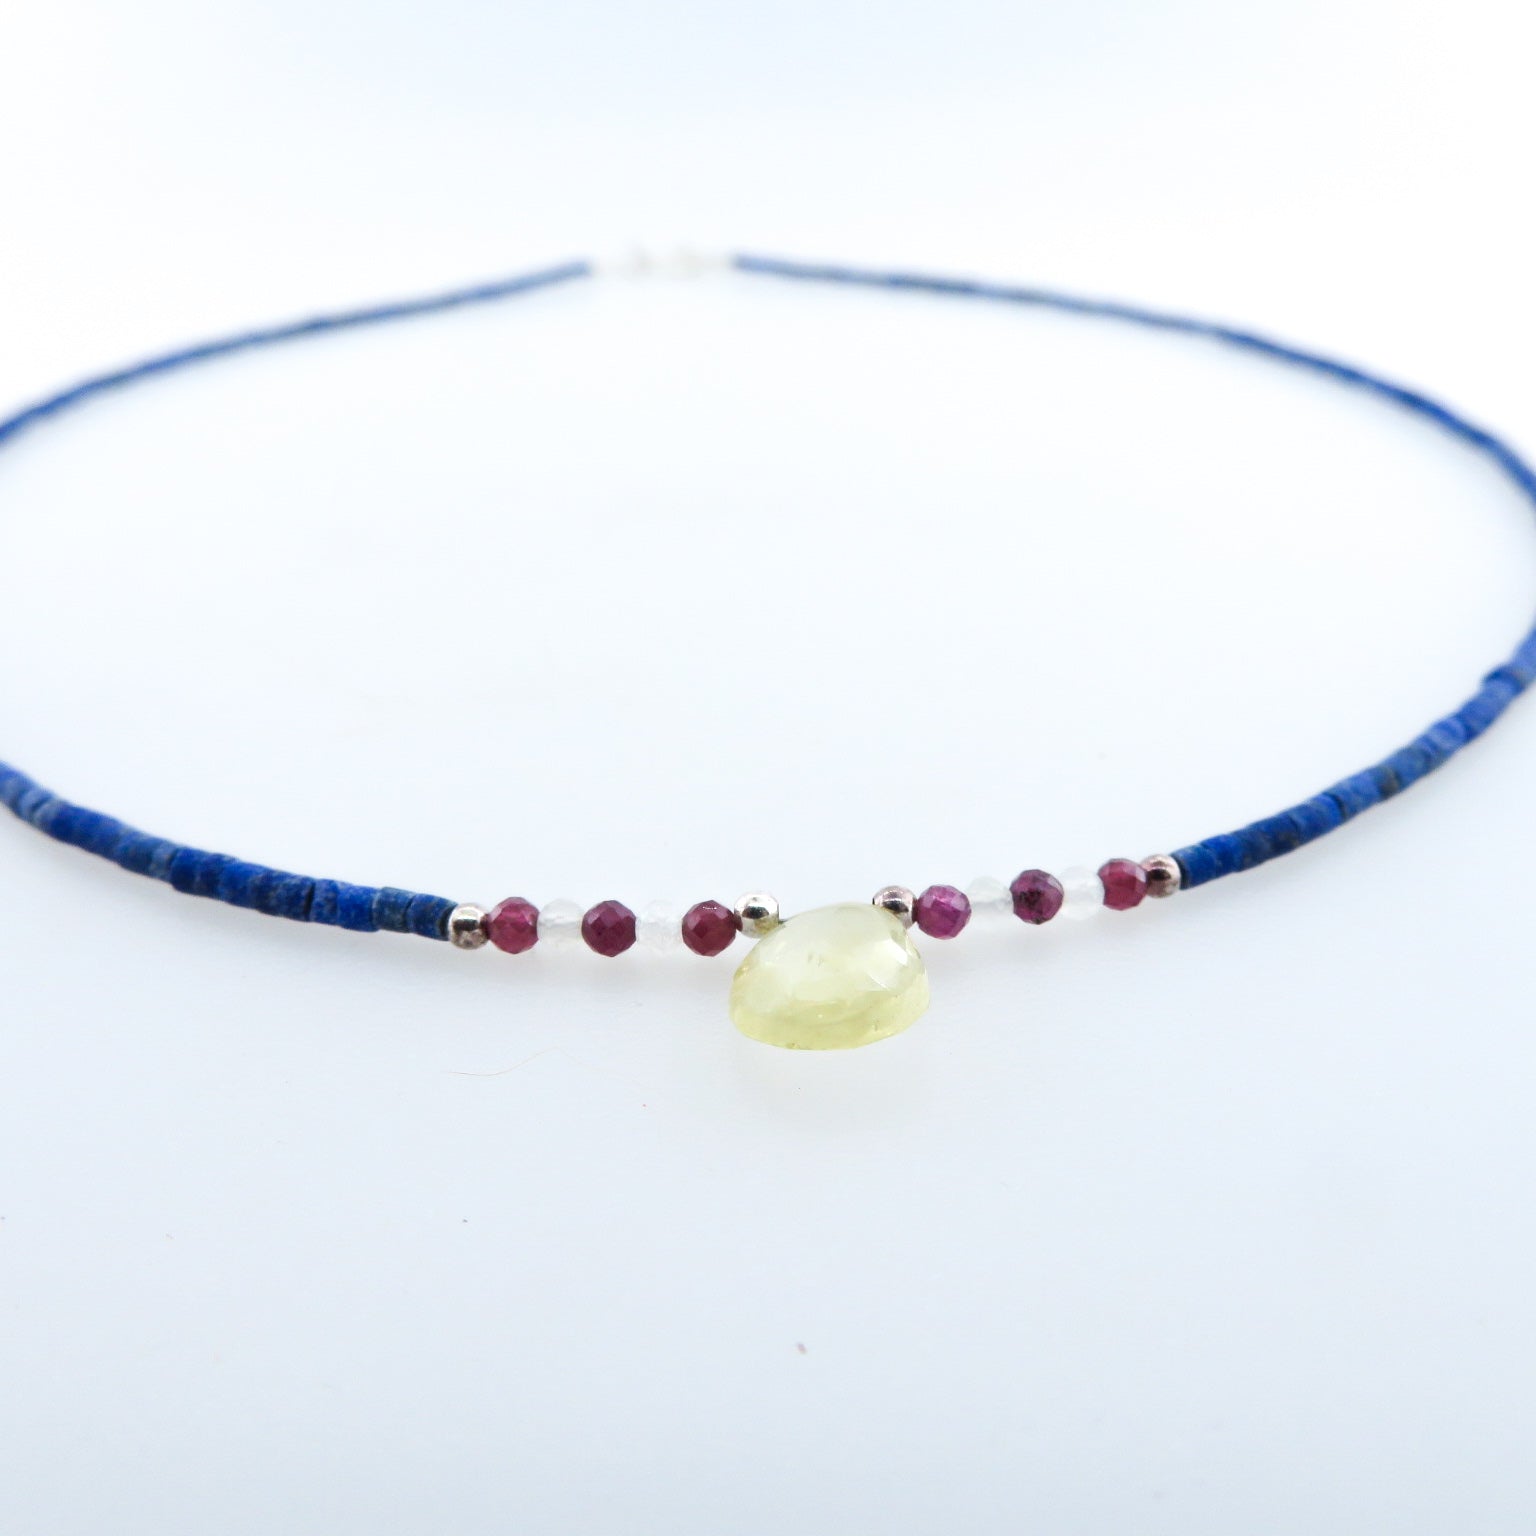 Lapis Lazuli Necklace with Citrine, Garnet, Rainbow Moon Stone and Silver Beads